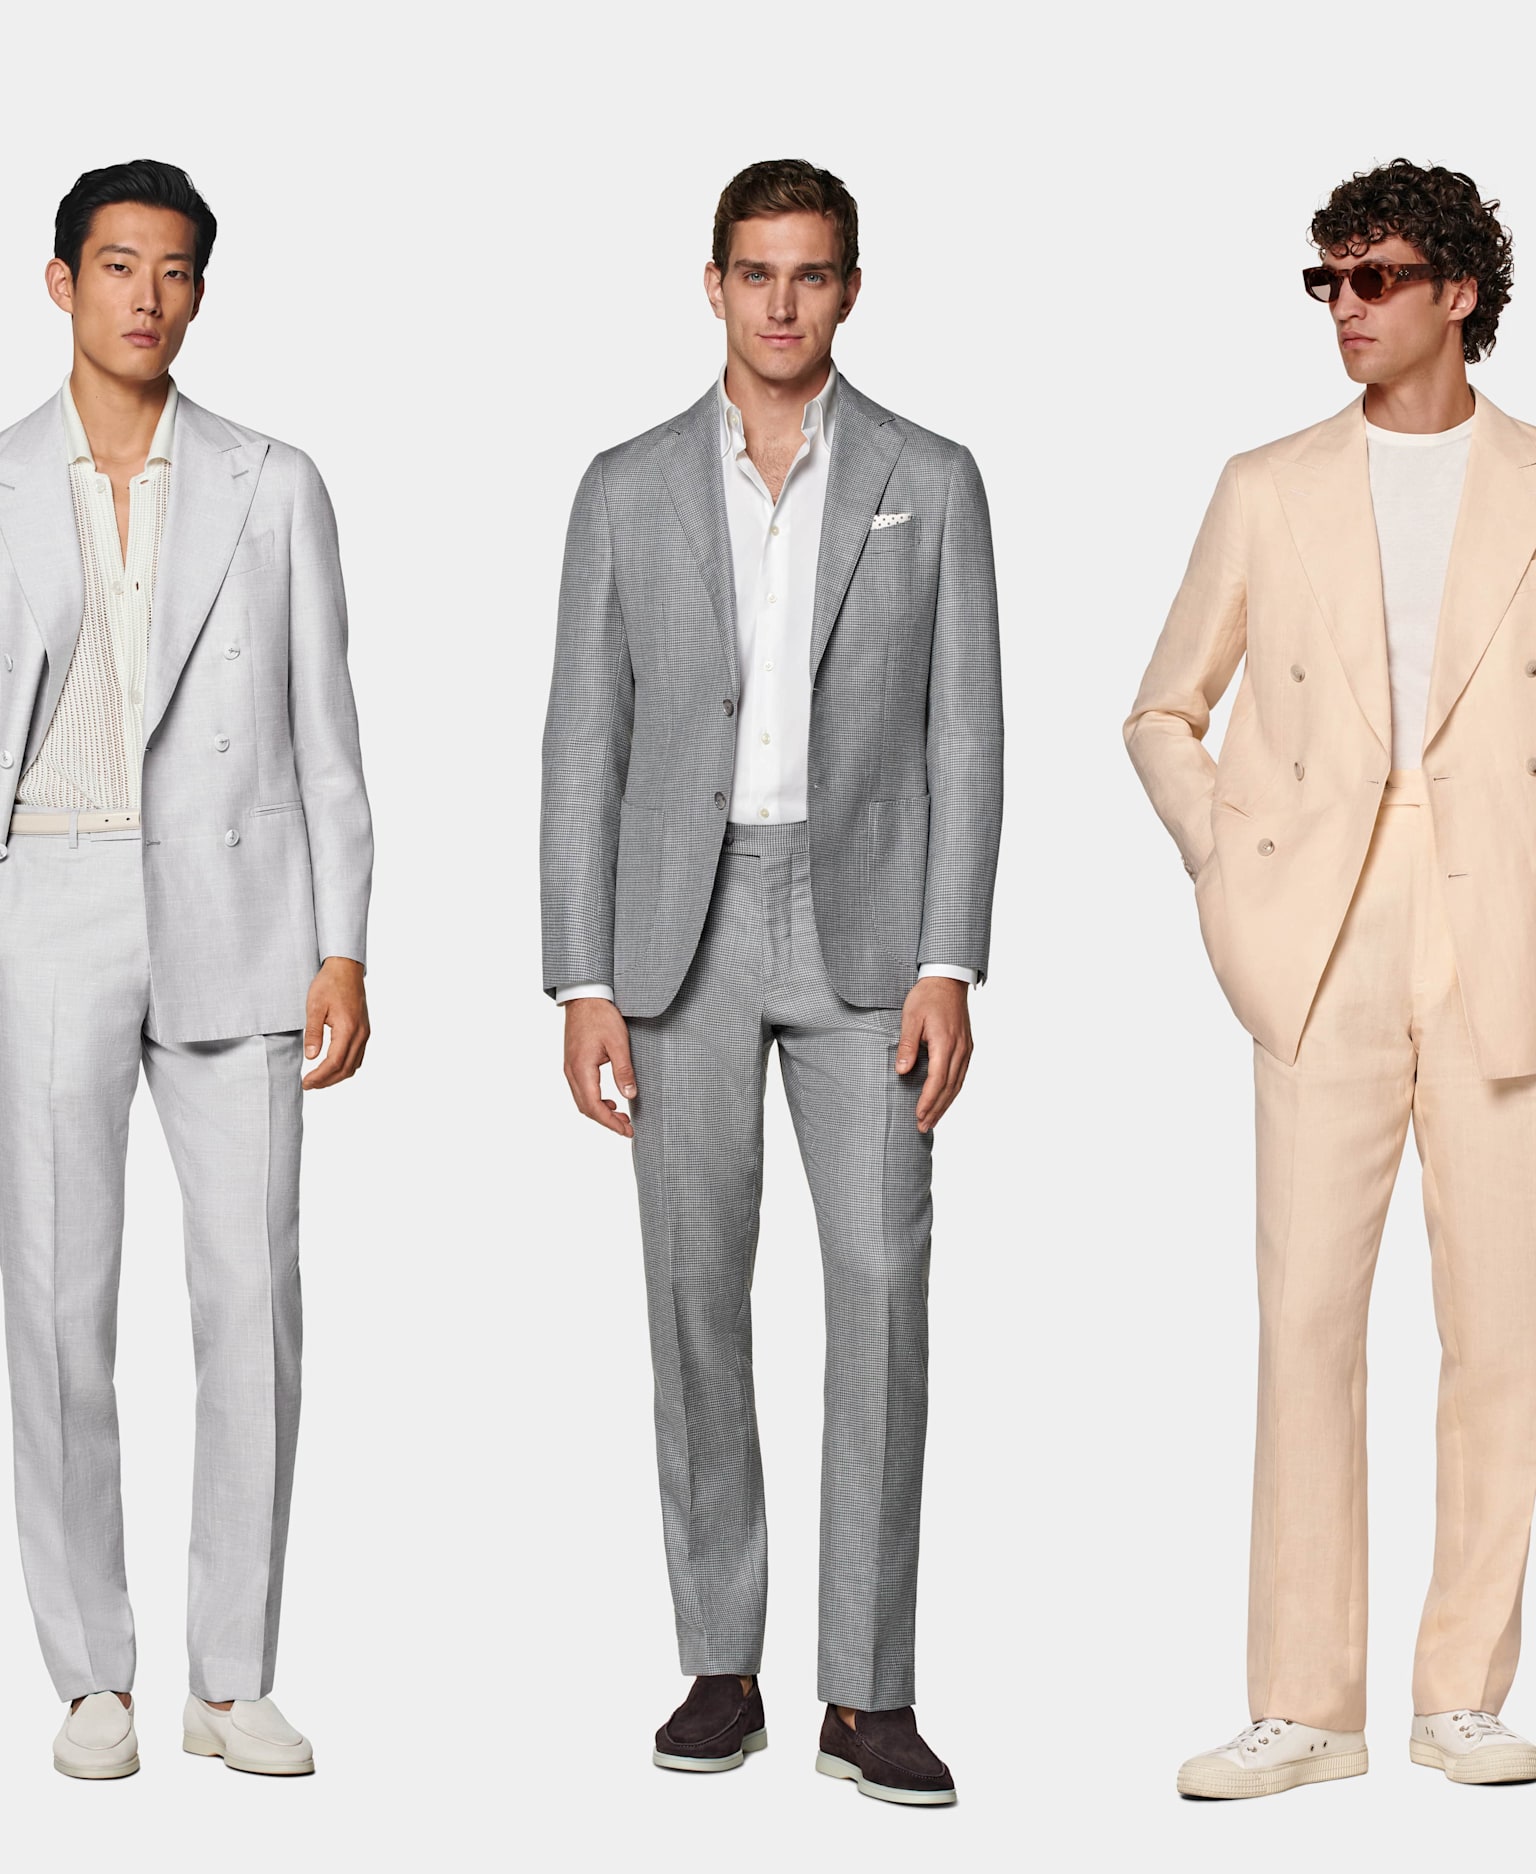 Mens Wedding Attire Guide: Suits, Shoes + Accessories